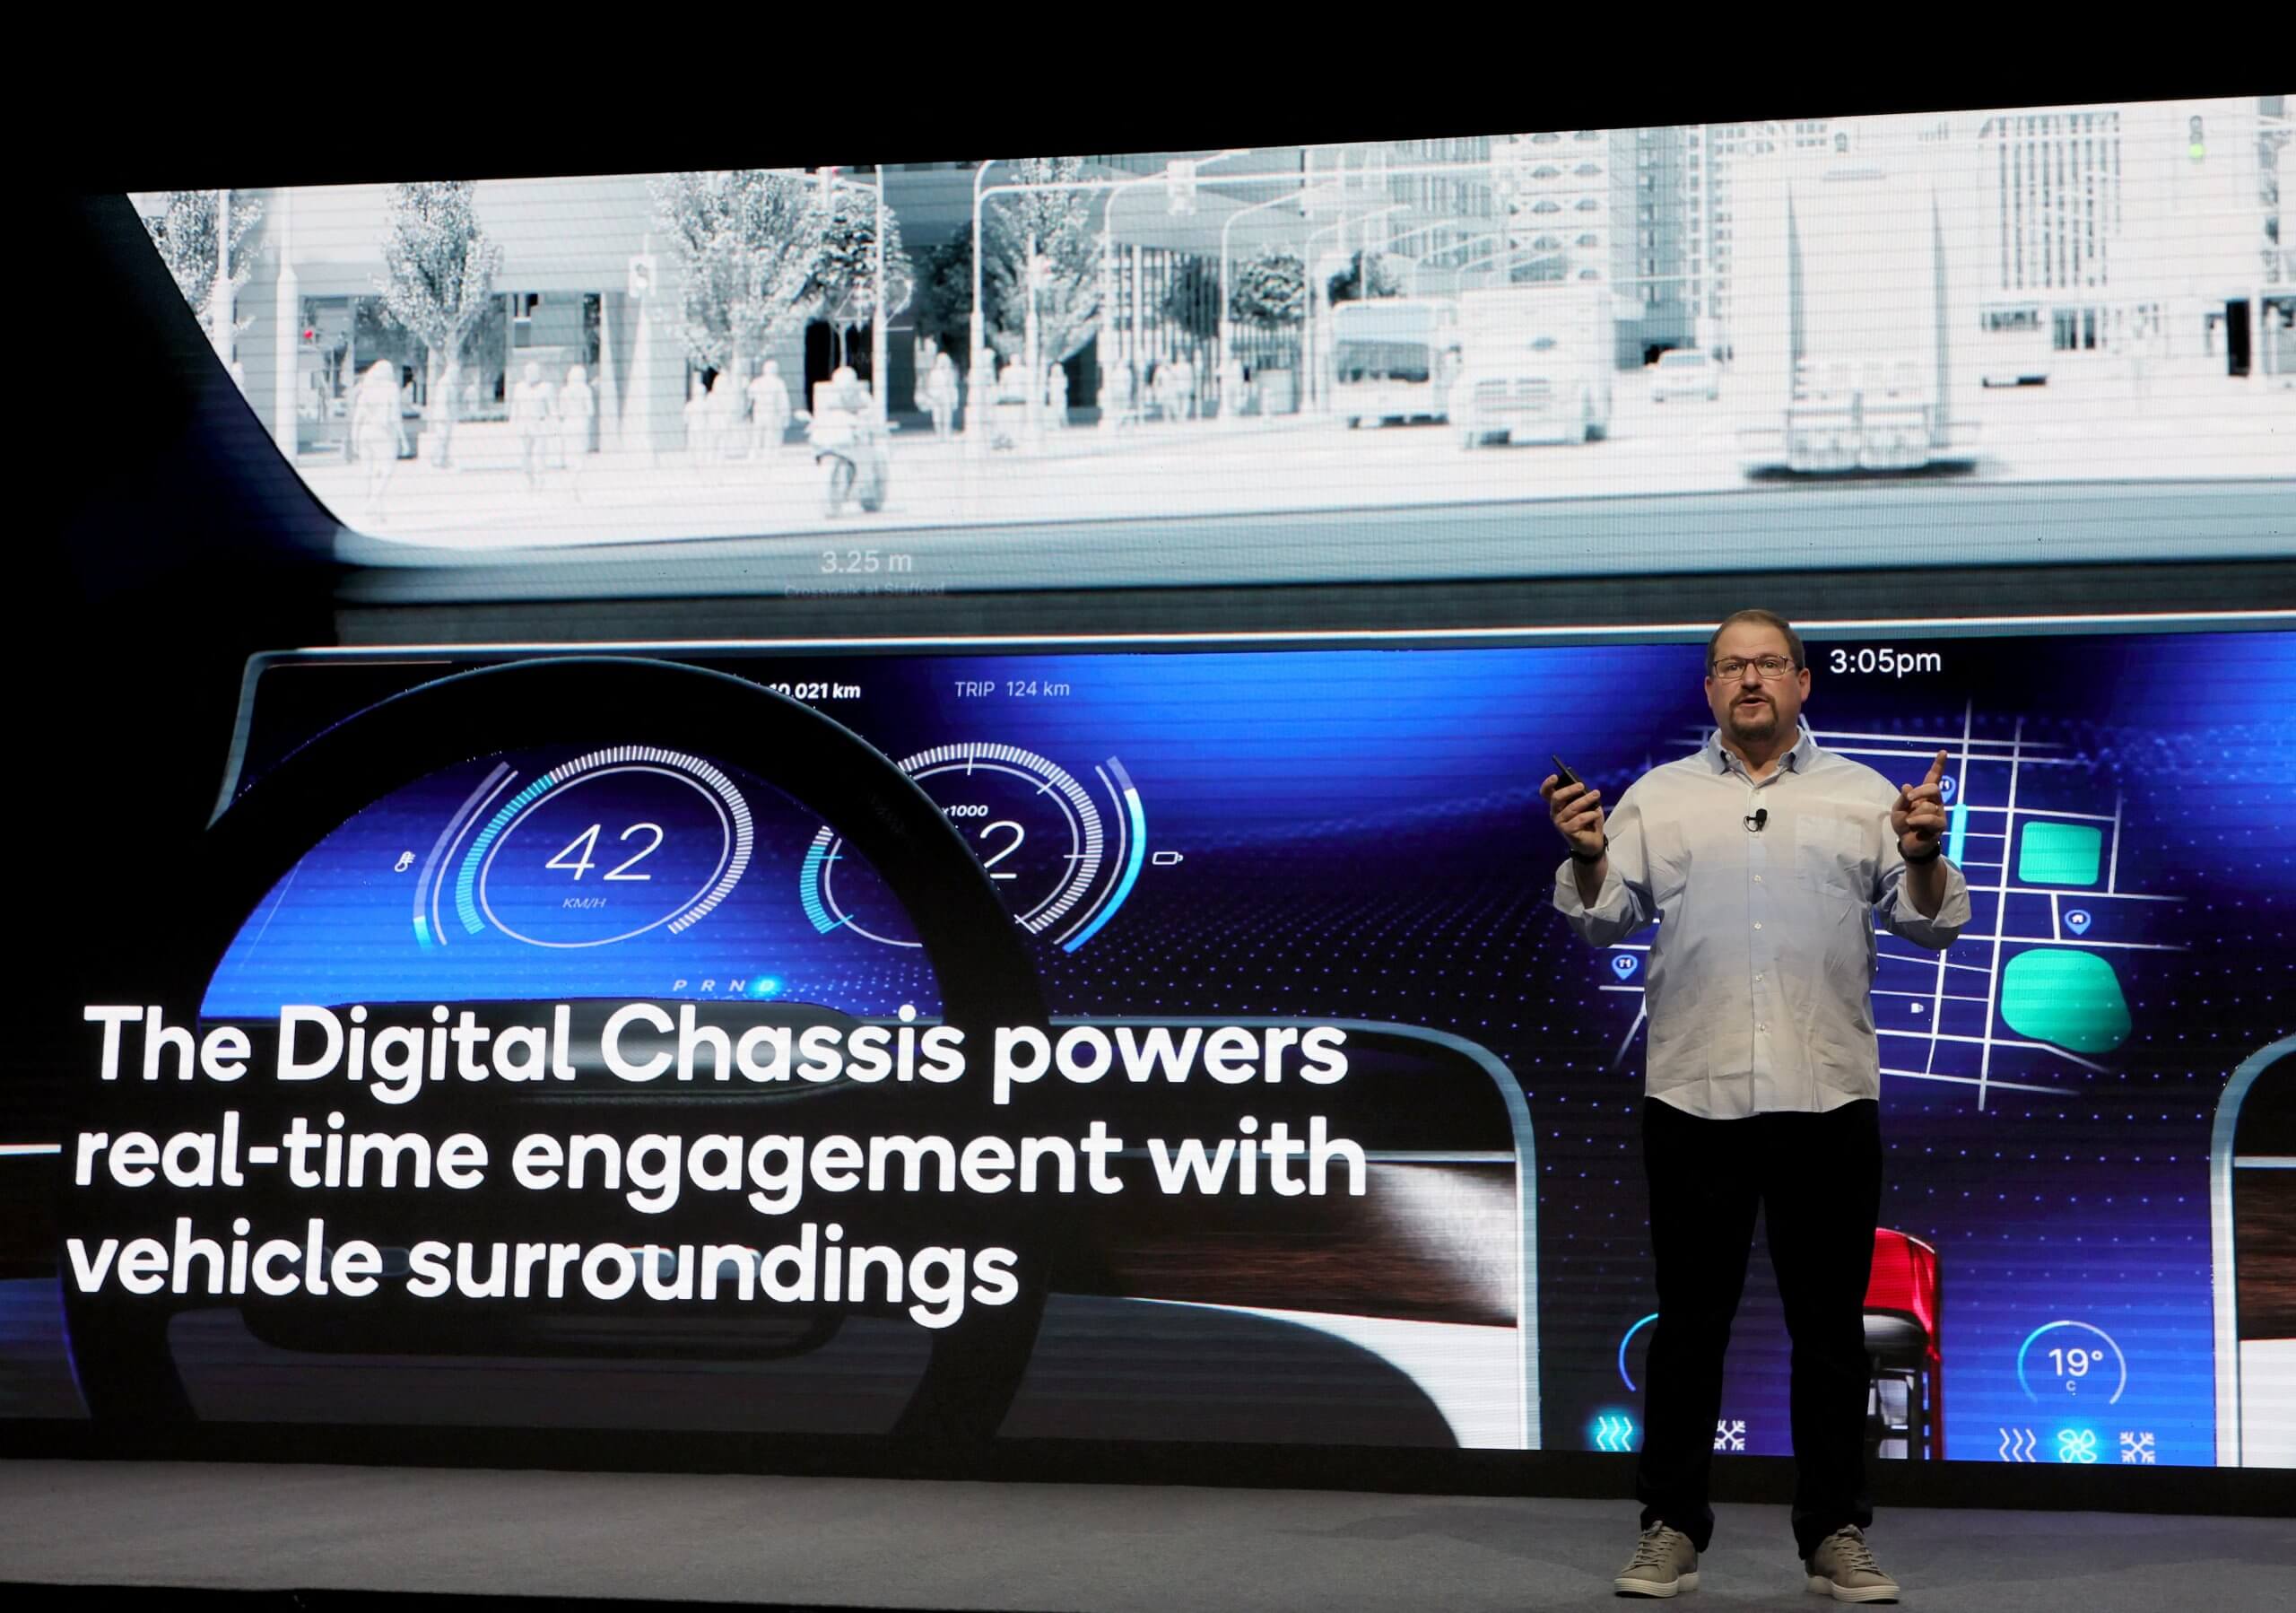  Qualcomm Inc. President and CEO Cristiano Amon speaks during the company's press event for CES 2022 at the Mandalay Bay Convention Center on January 4, 2022 in Las Vegas, Nevada.